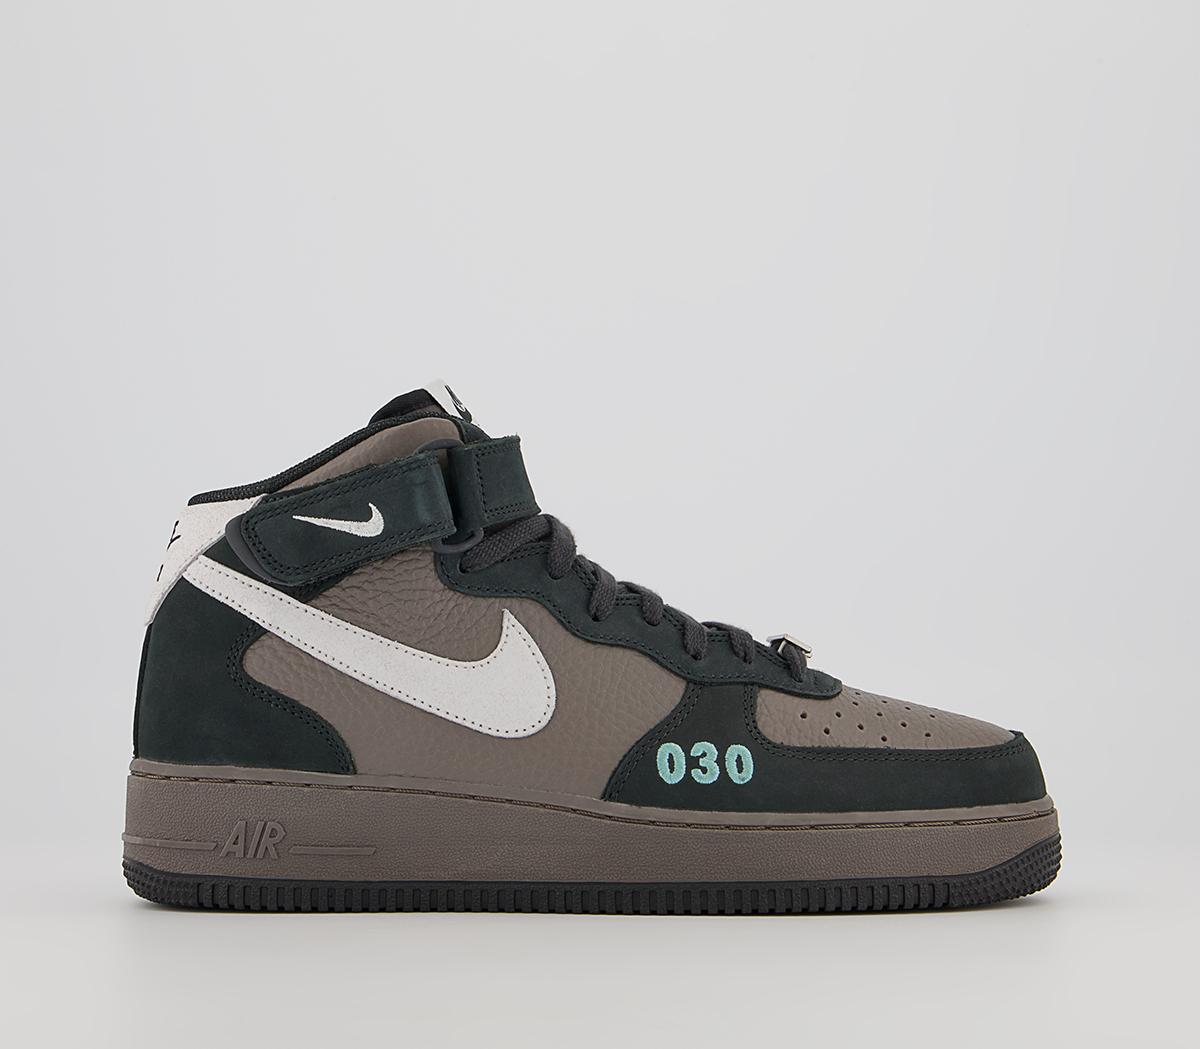 NikeNike Air Force 1 Mid TrainersCave Stone White Off Noir Washed Teal Black Metall